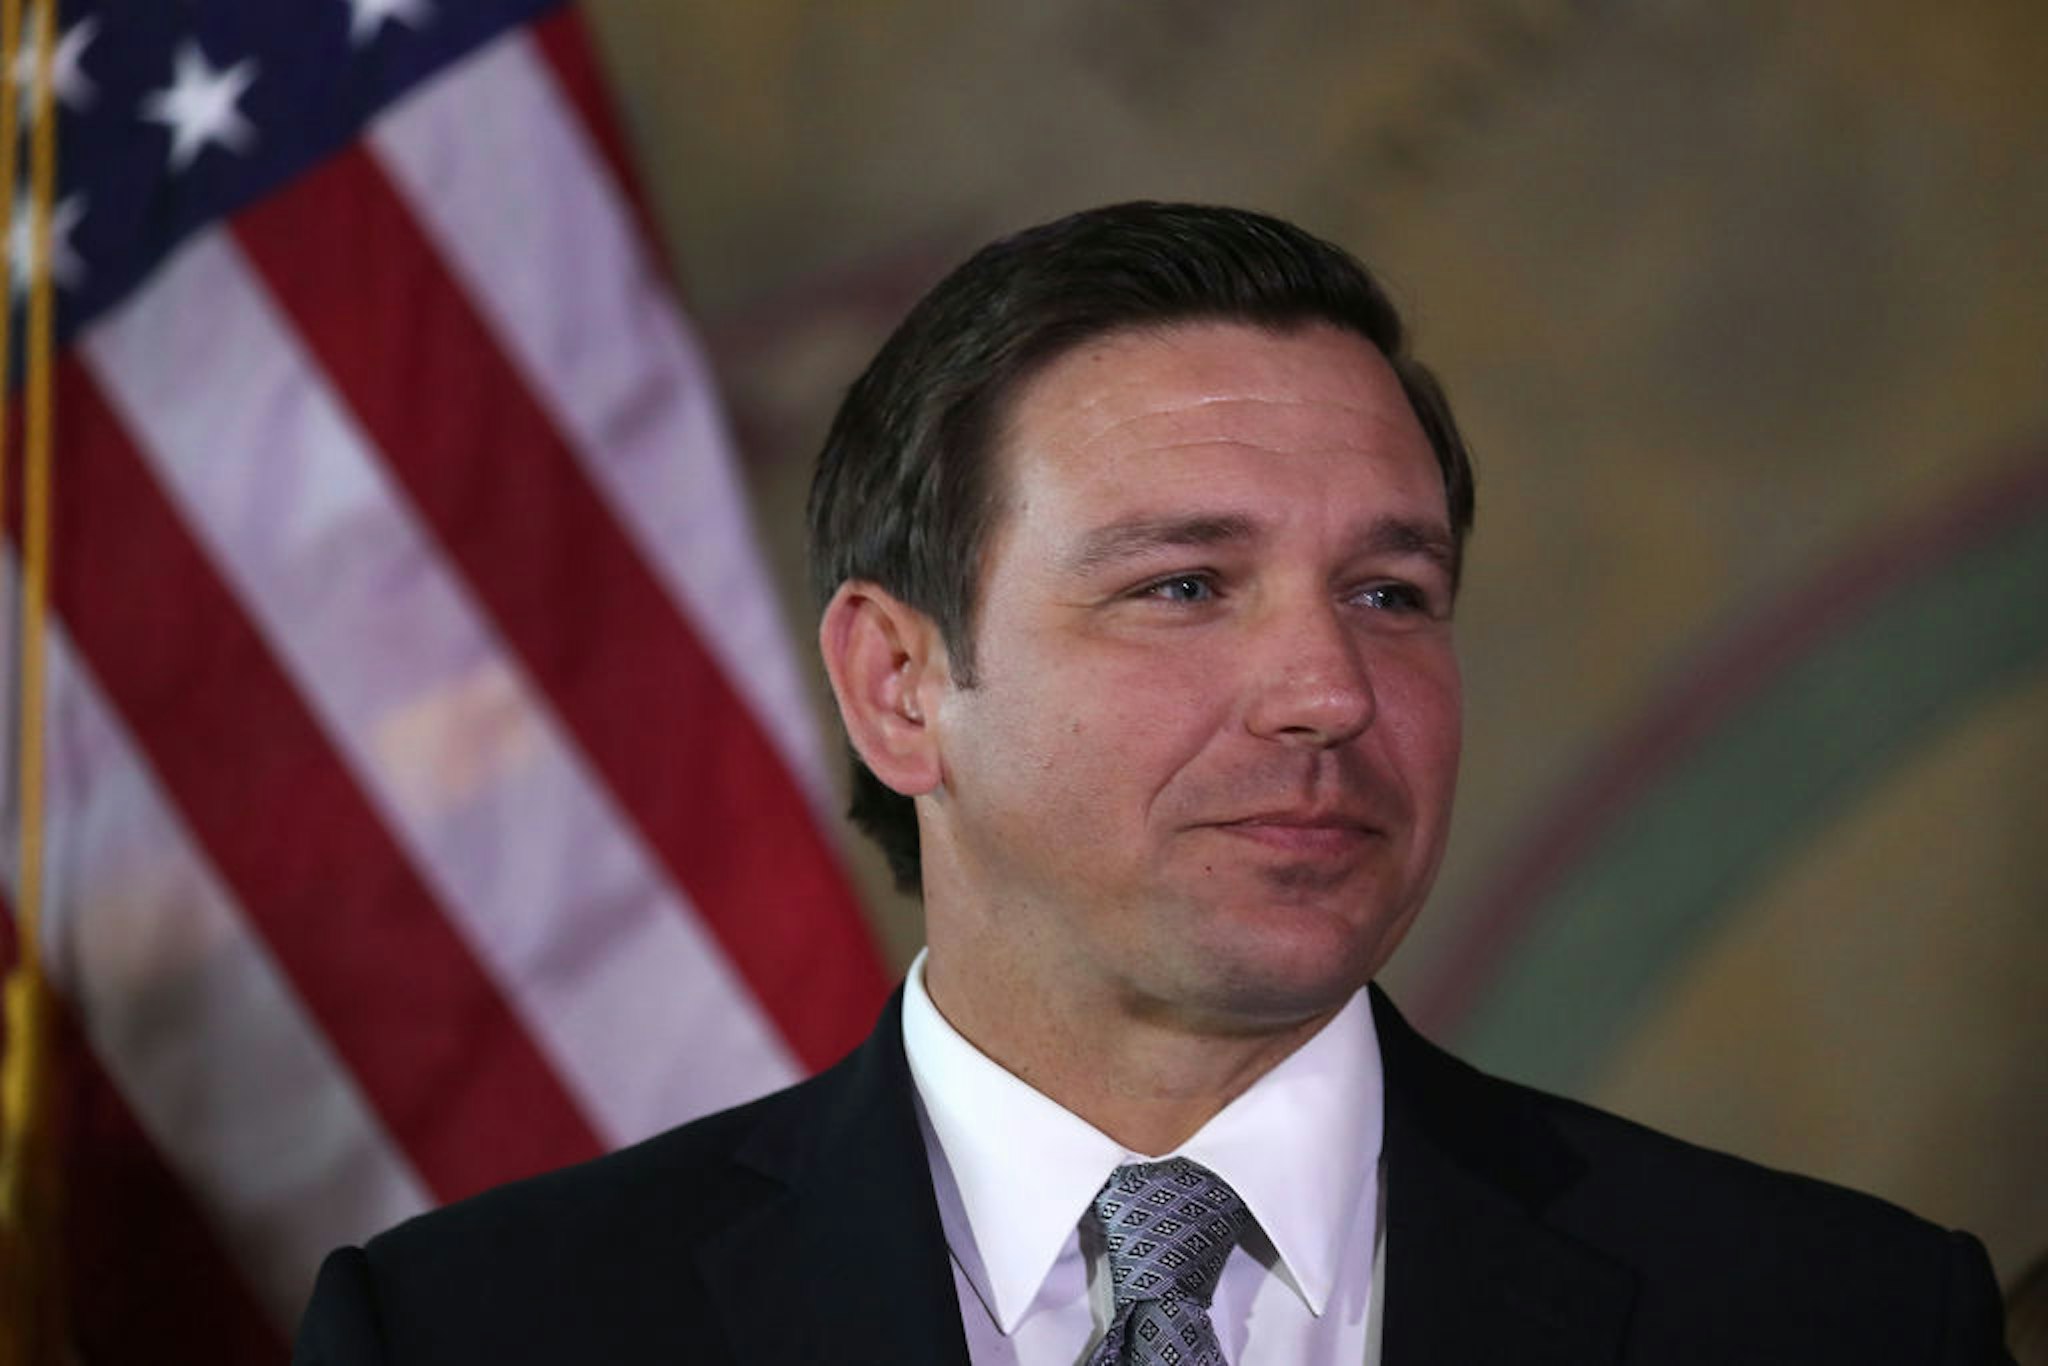 Ron DeSantis attends an event at the Freedom Tower where he named Barbara Lagoa to the Florida Supreme Court on January 09, 2019 in Miami, Florida.